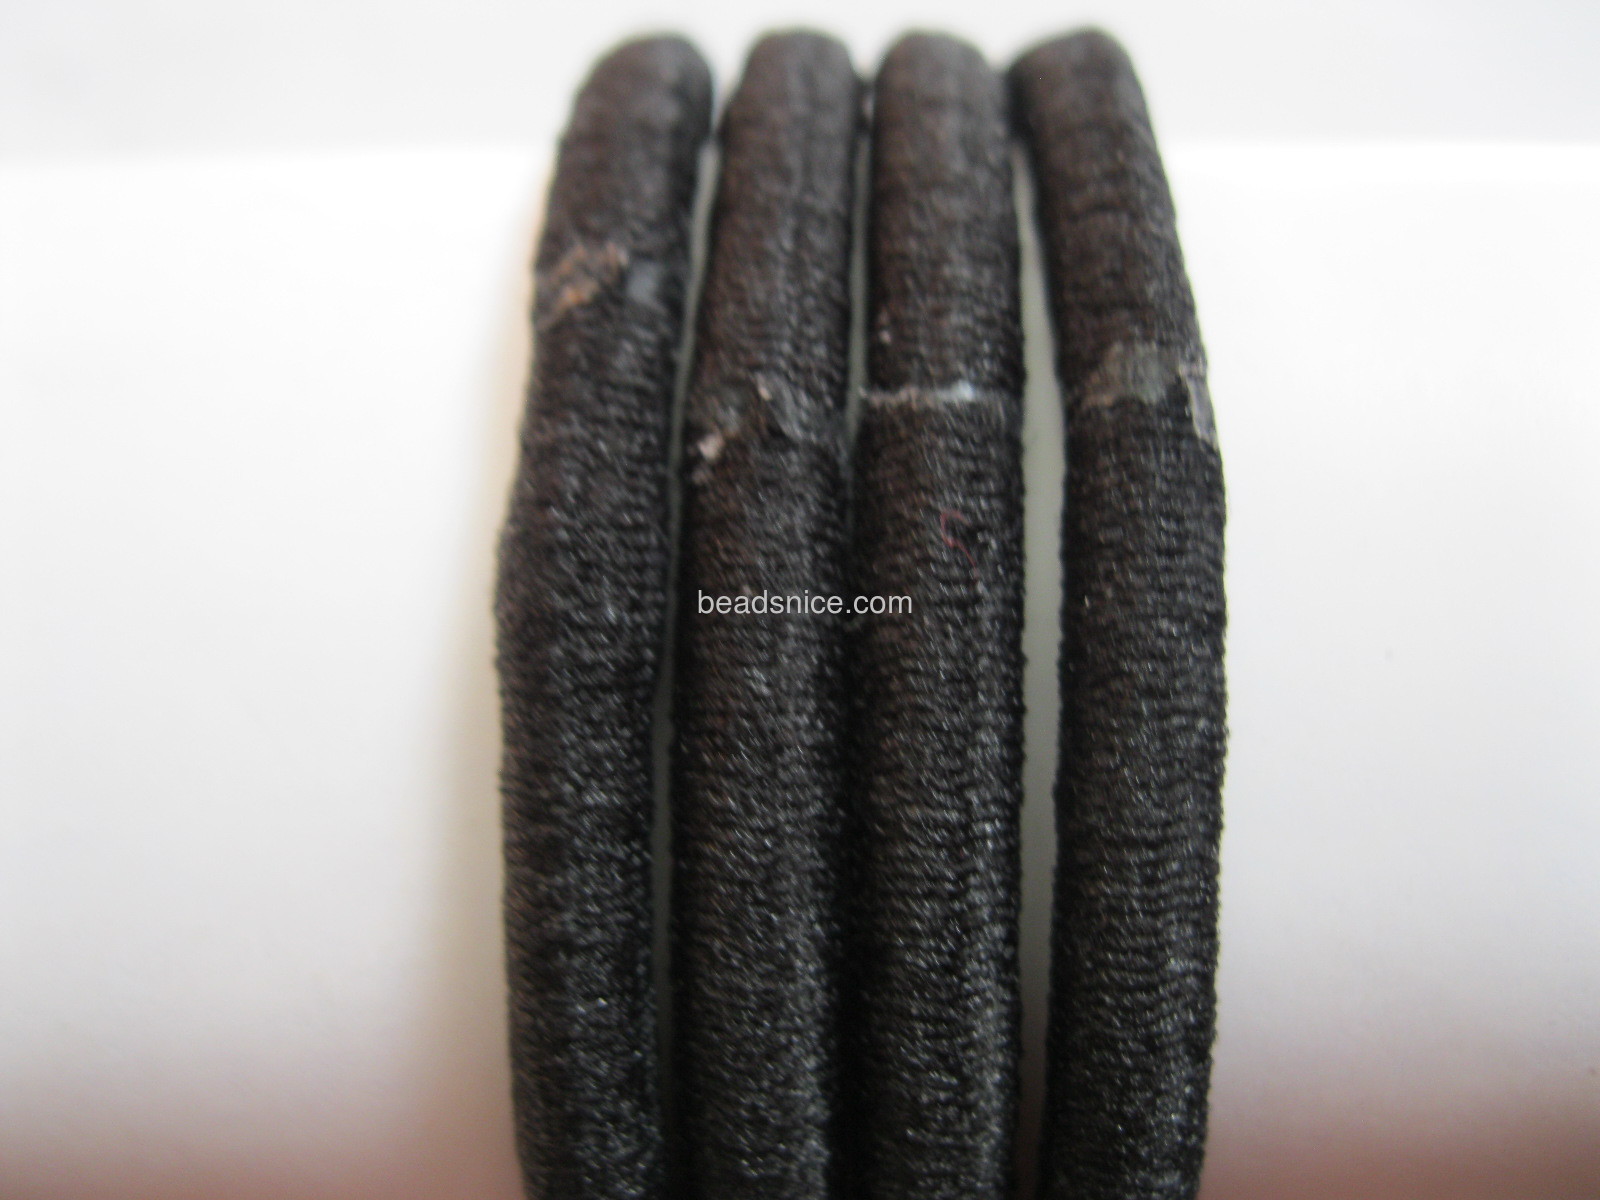 Hair bundle models KoreanThick rubber band hair accessories thickness:6mm  Perimeter:16cm